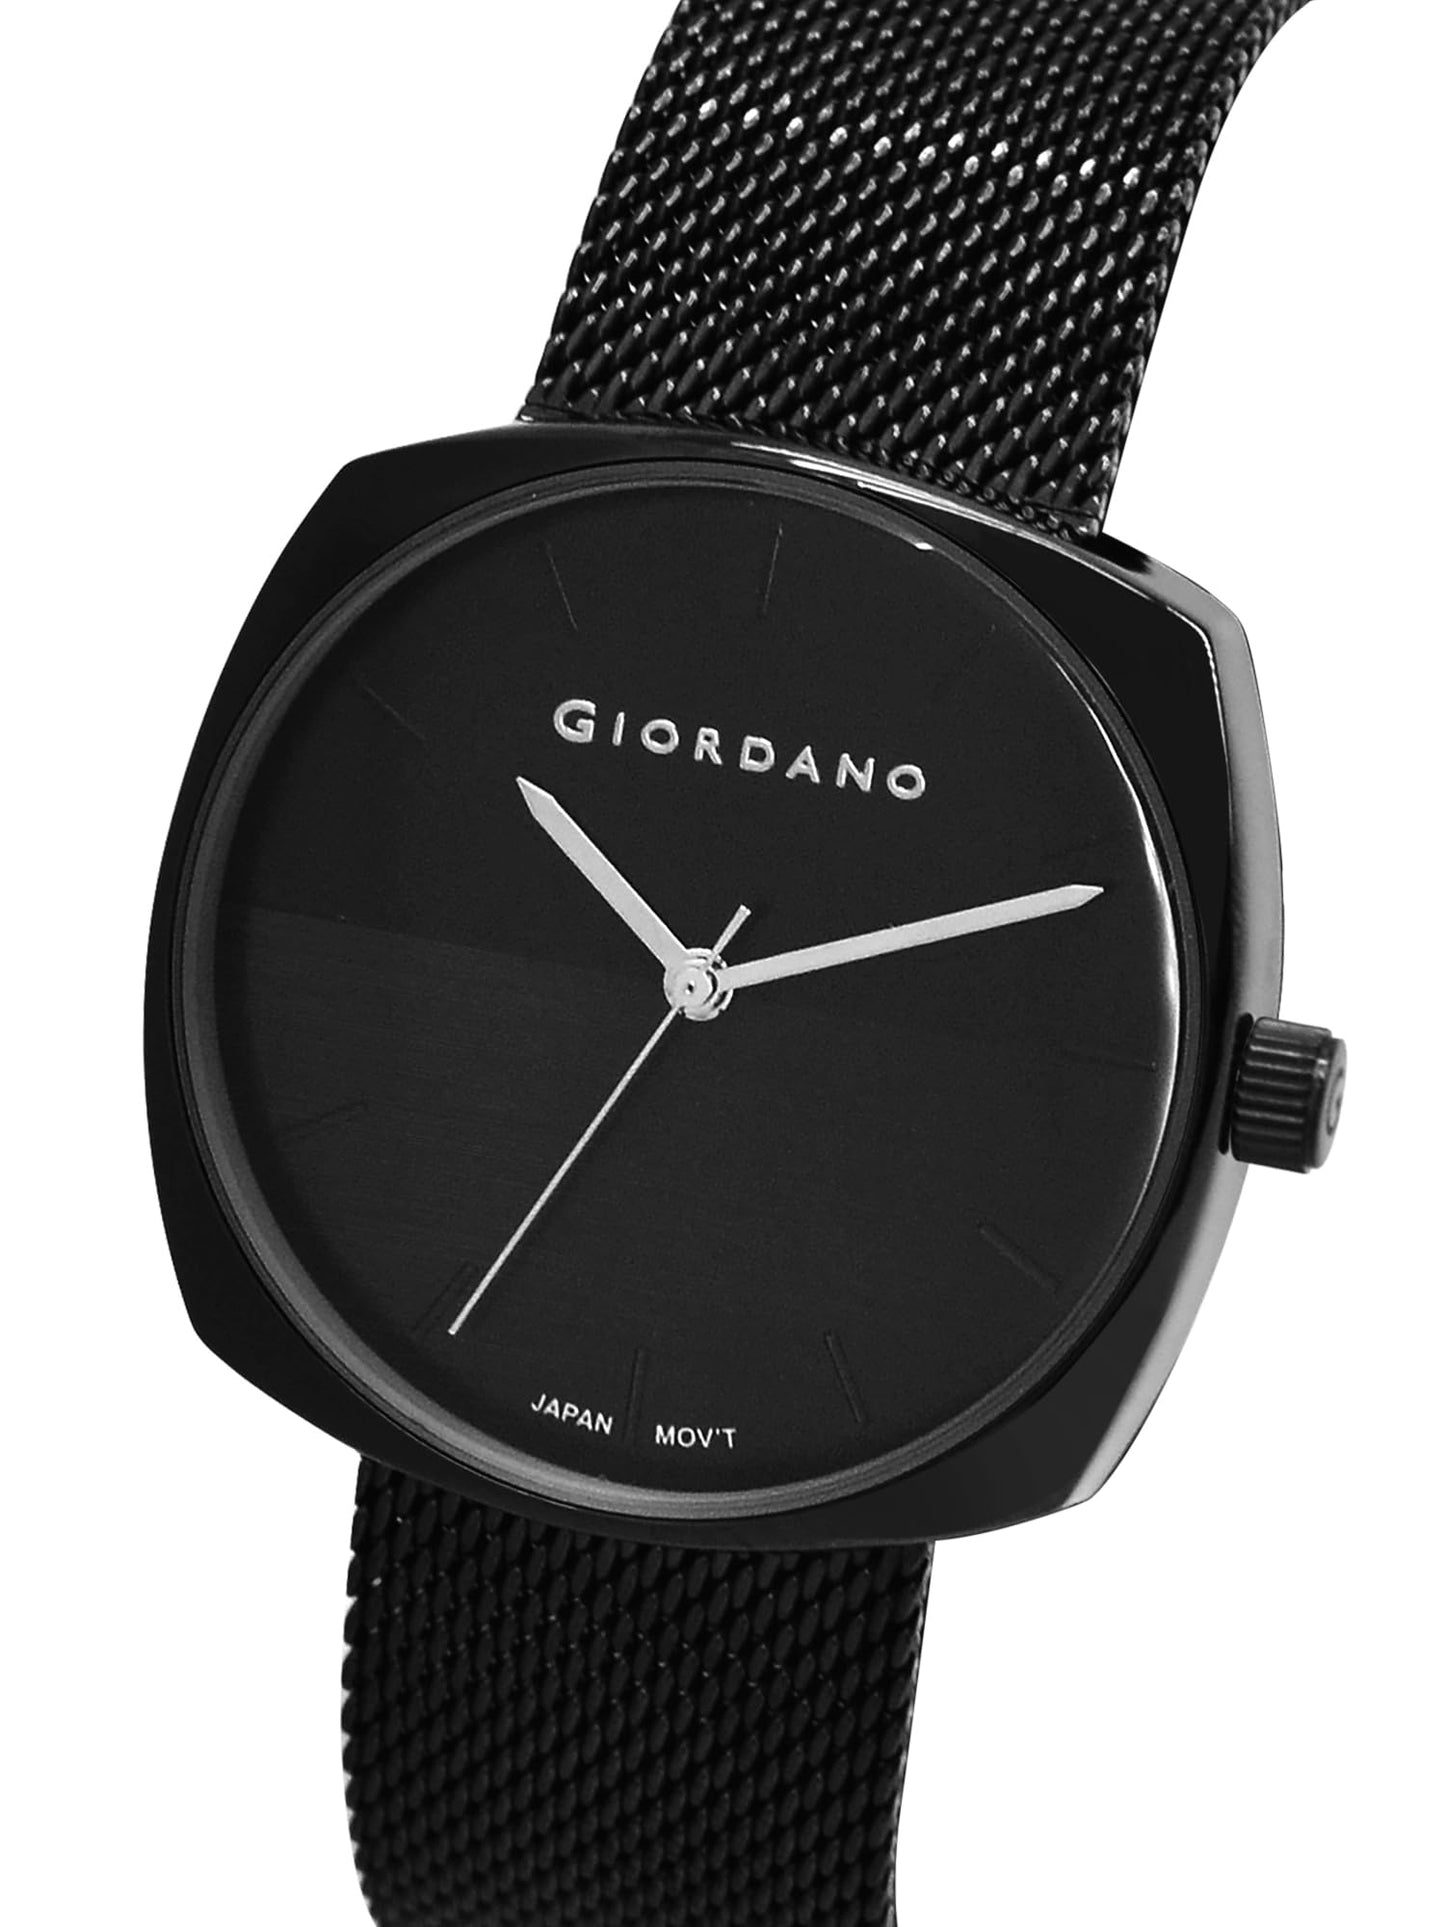 Giordano Analog Stylish Watch for Women Water Resistant Fashion Watch Round Shape with 3 Hand Mechanism Wrist Watch to Compliment Your Look/Ideal Gift for Female - GZ-60076-11